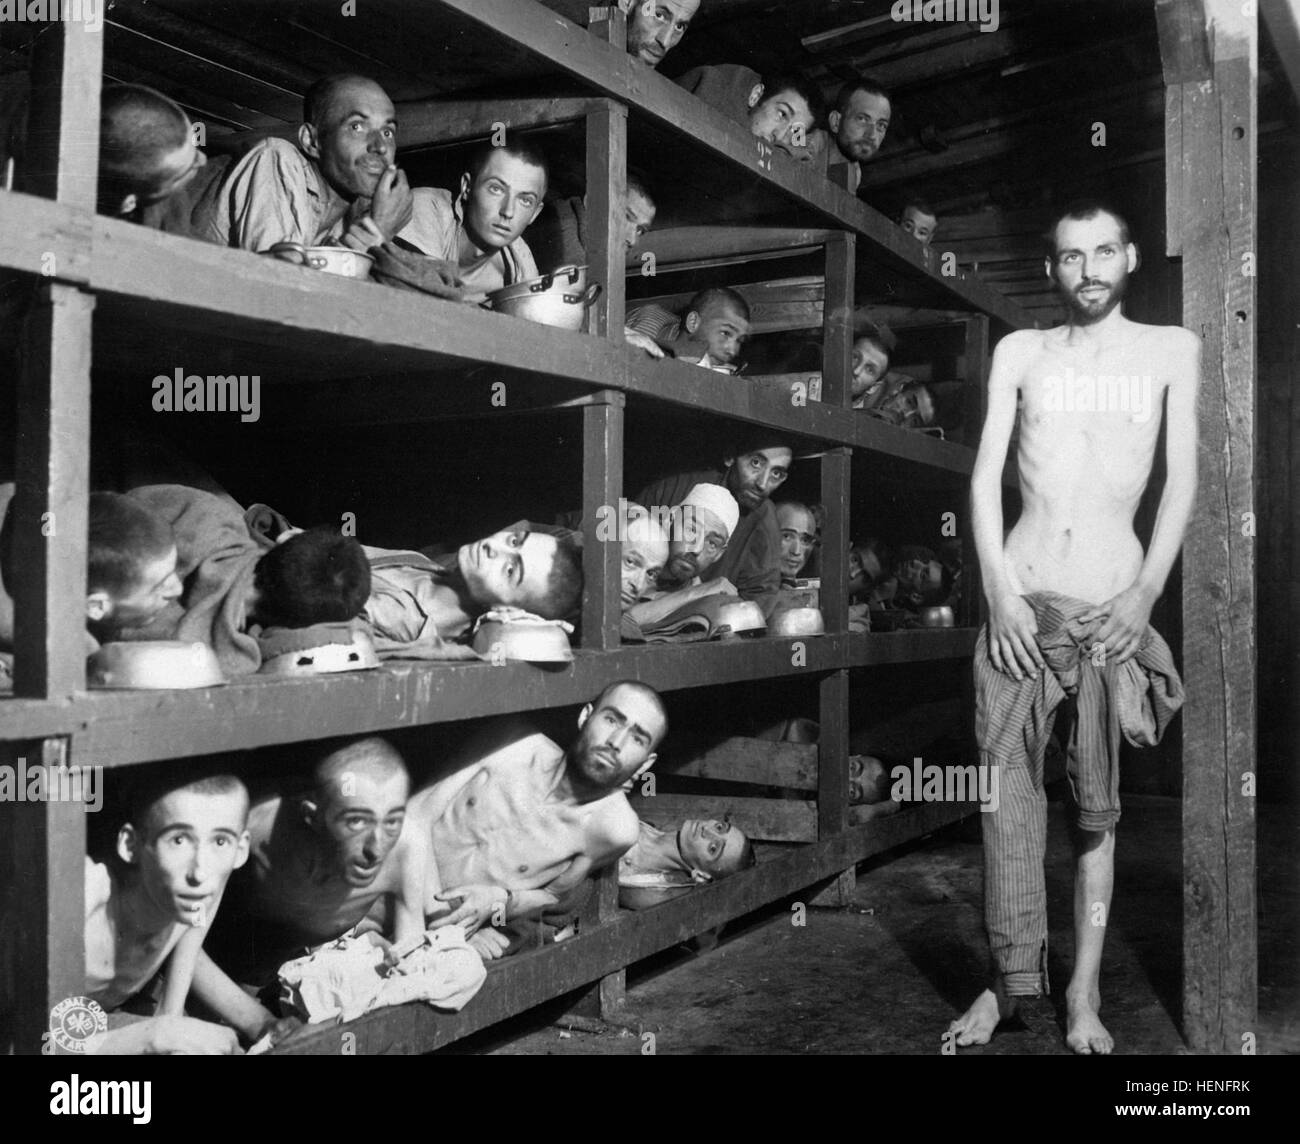 These are slave laborers in the Buchenwald concentration camp near Jena; many had died from malnutrition when U.S. troops of the 80th Division entered the camp.  Germany, April 16, 1945.  Pvt. H. Miller.  (Army) NARA FILE #:  208-AA-206K-31 WAR & CONFLICT BOOK #:  1105 Buchenwald Slave Laborers Liberation Stock Photo